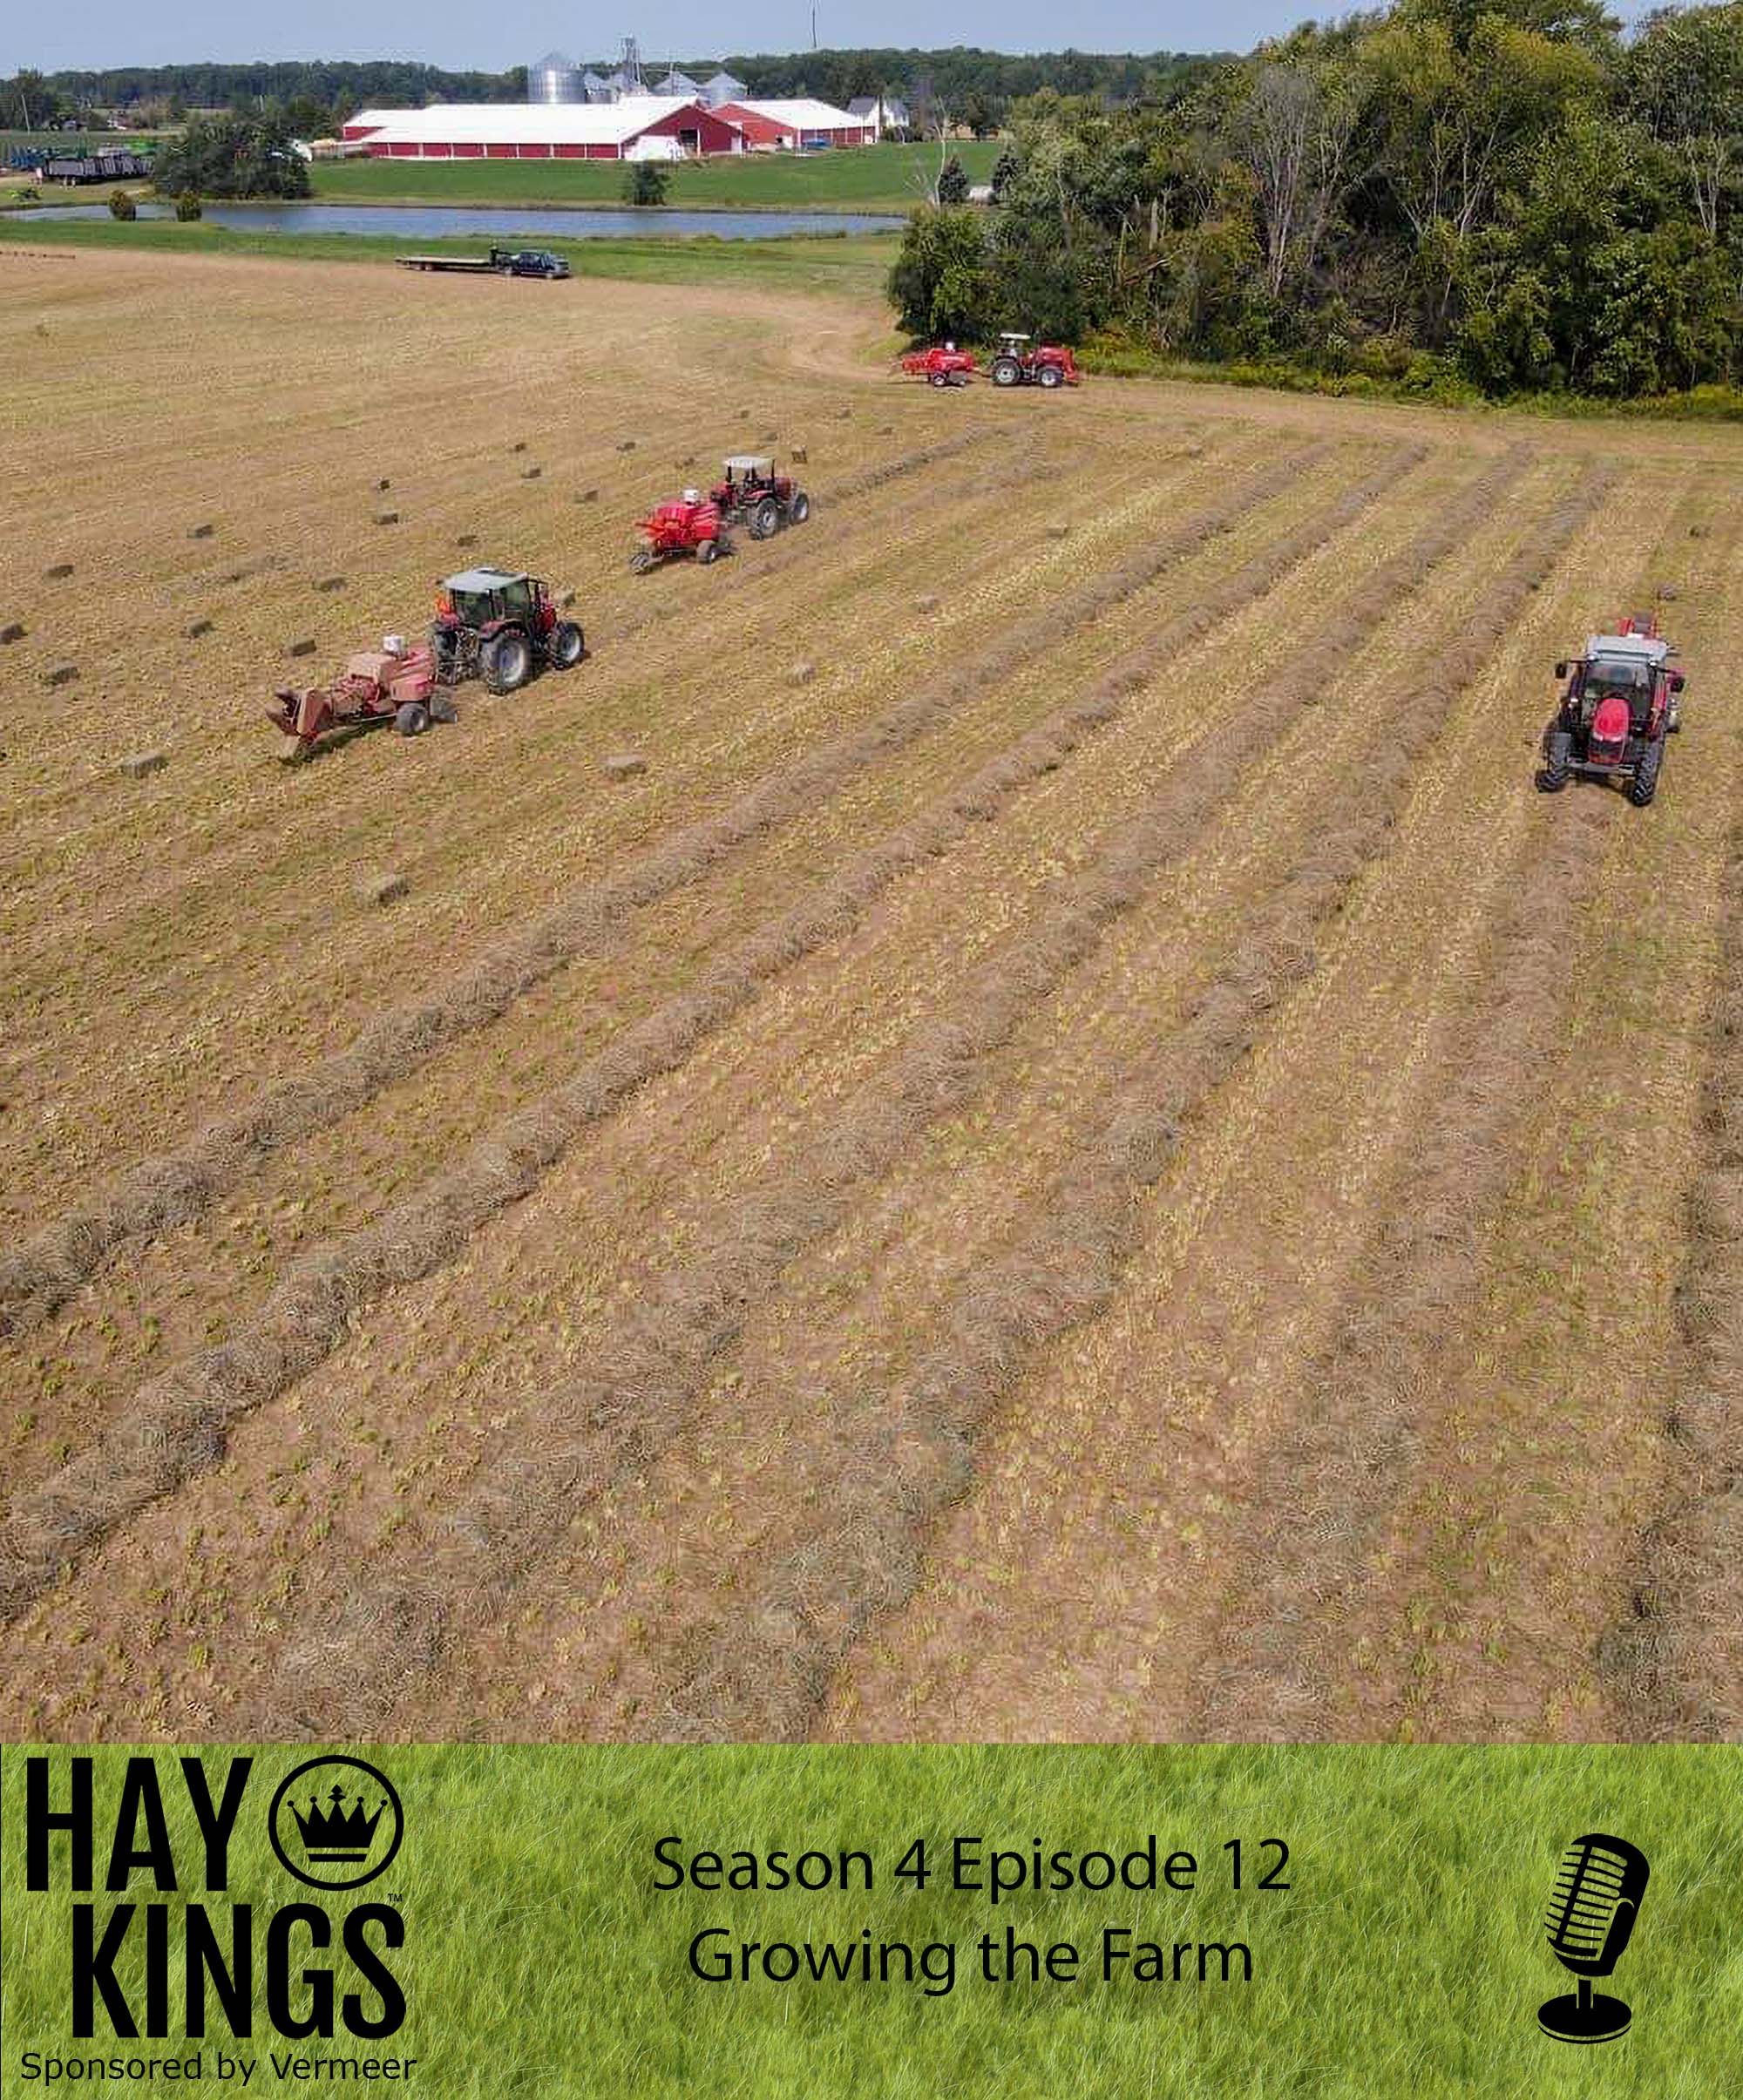 Hay Kings Podcast: Bundling Small Bales (S4:E12)